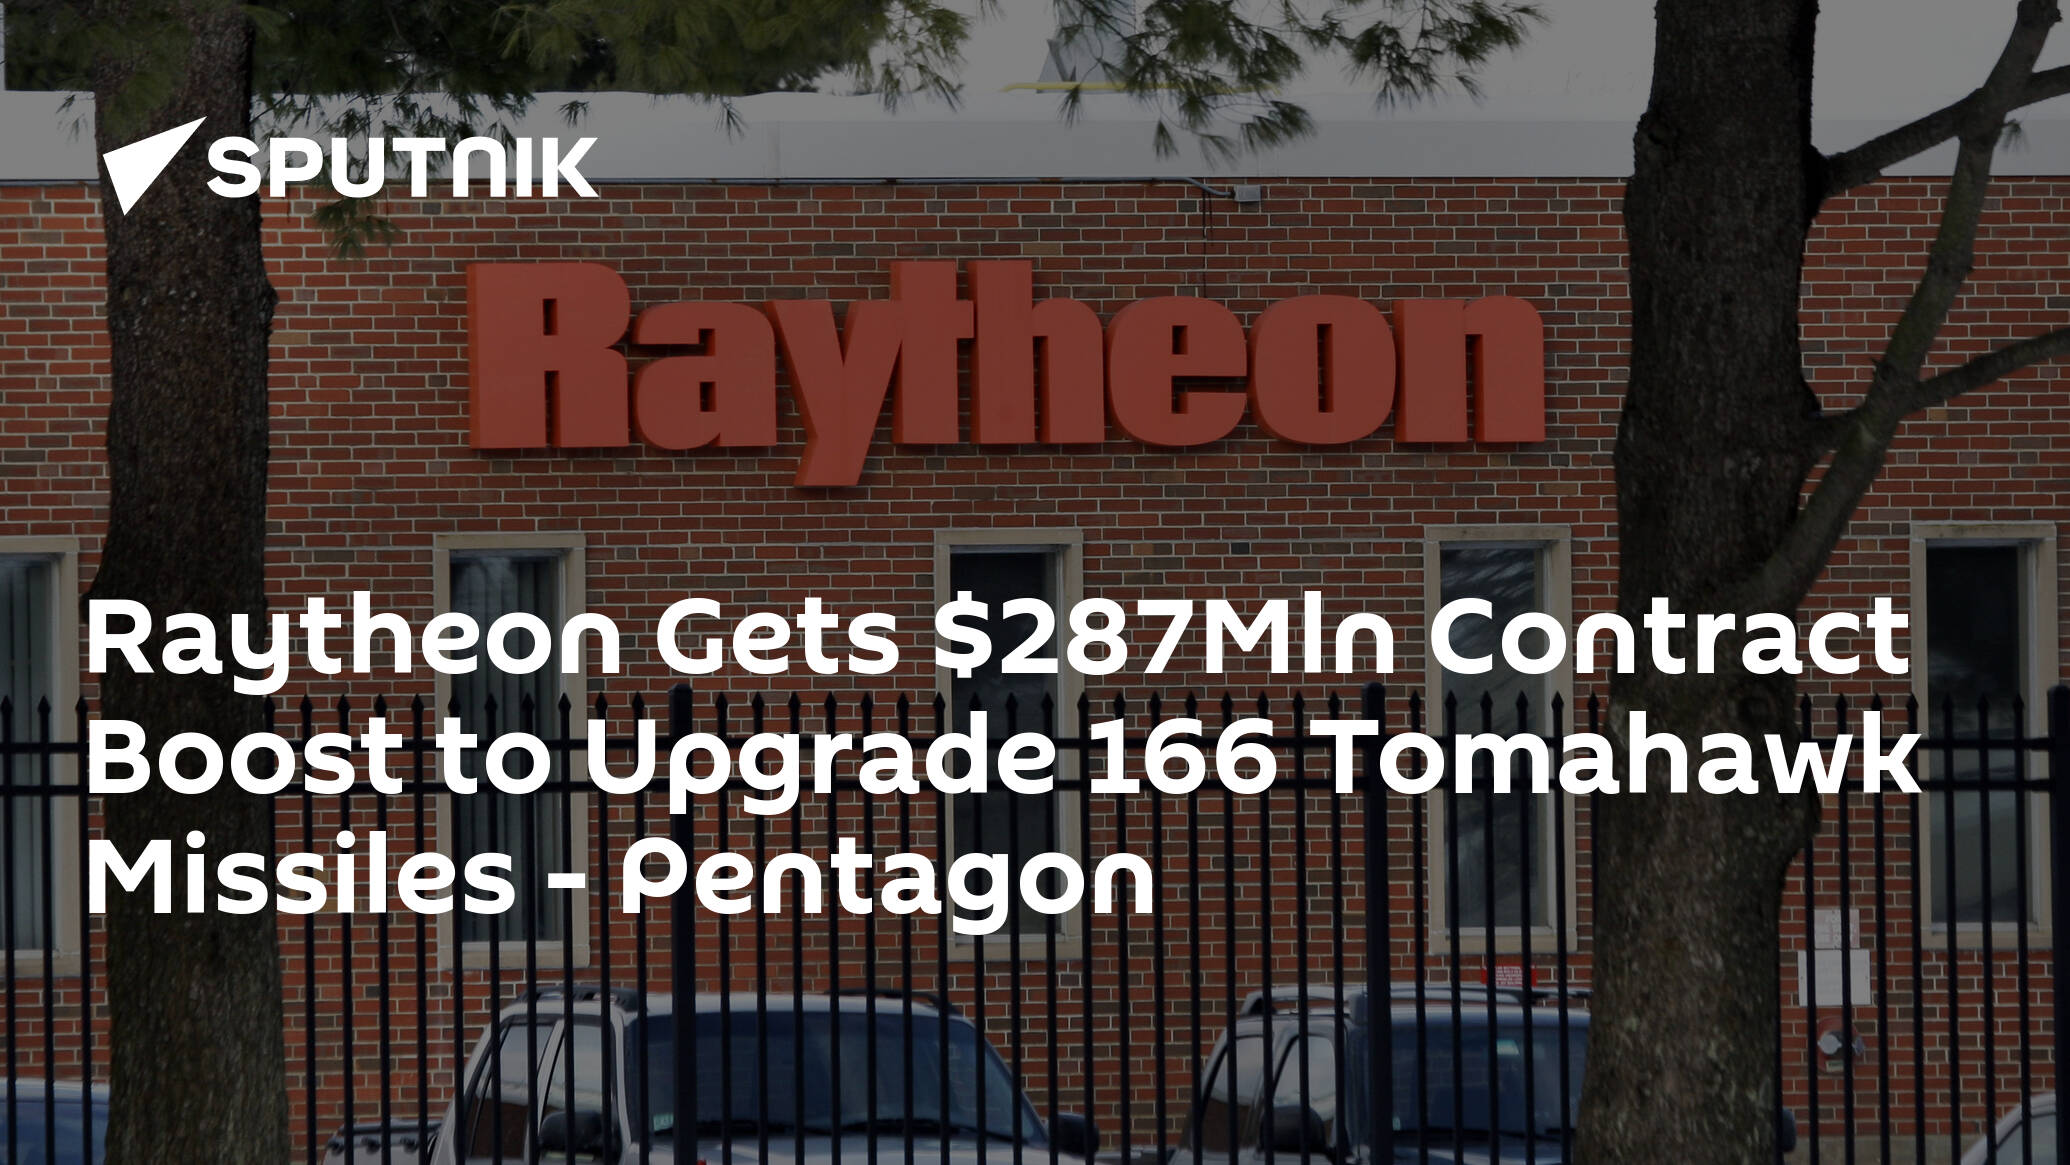 Raytheon Gets $287Mln Contract Boost to Upgrade 166 Tomahawk Missiles – Pentagon